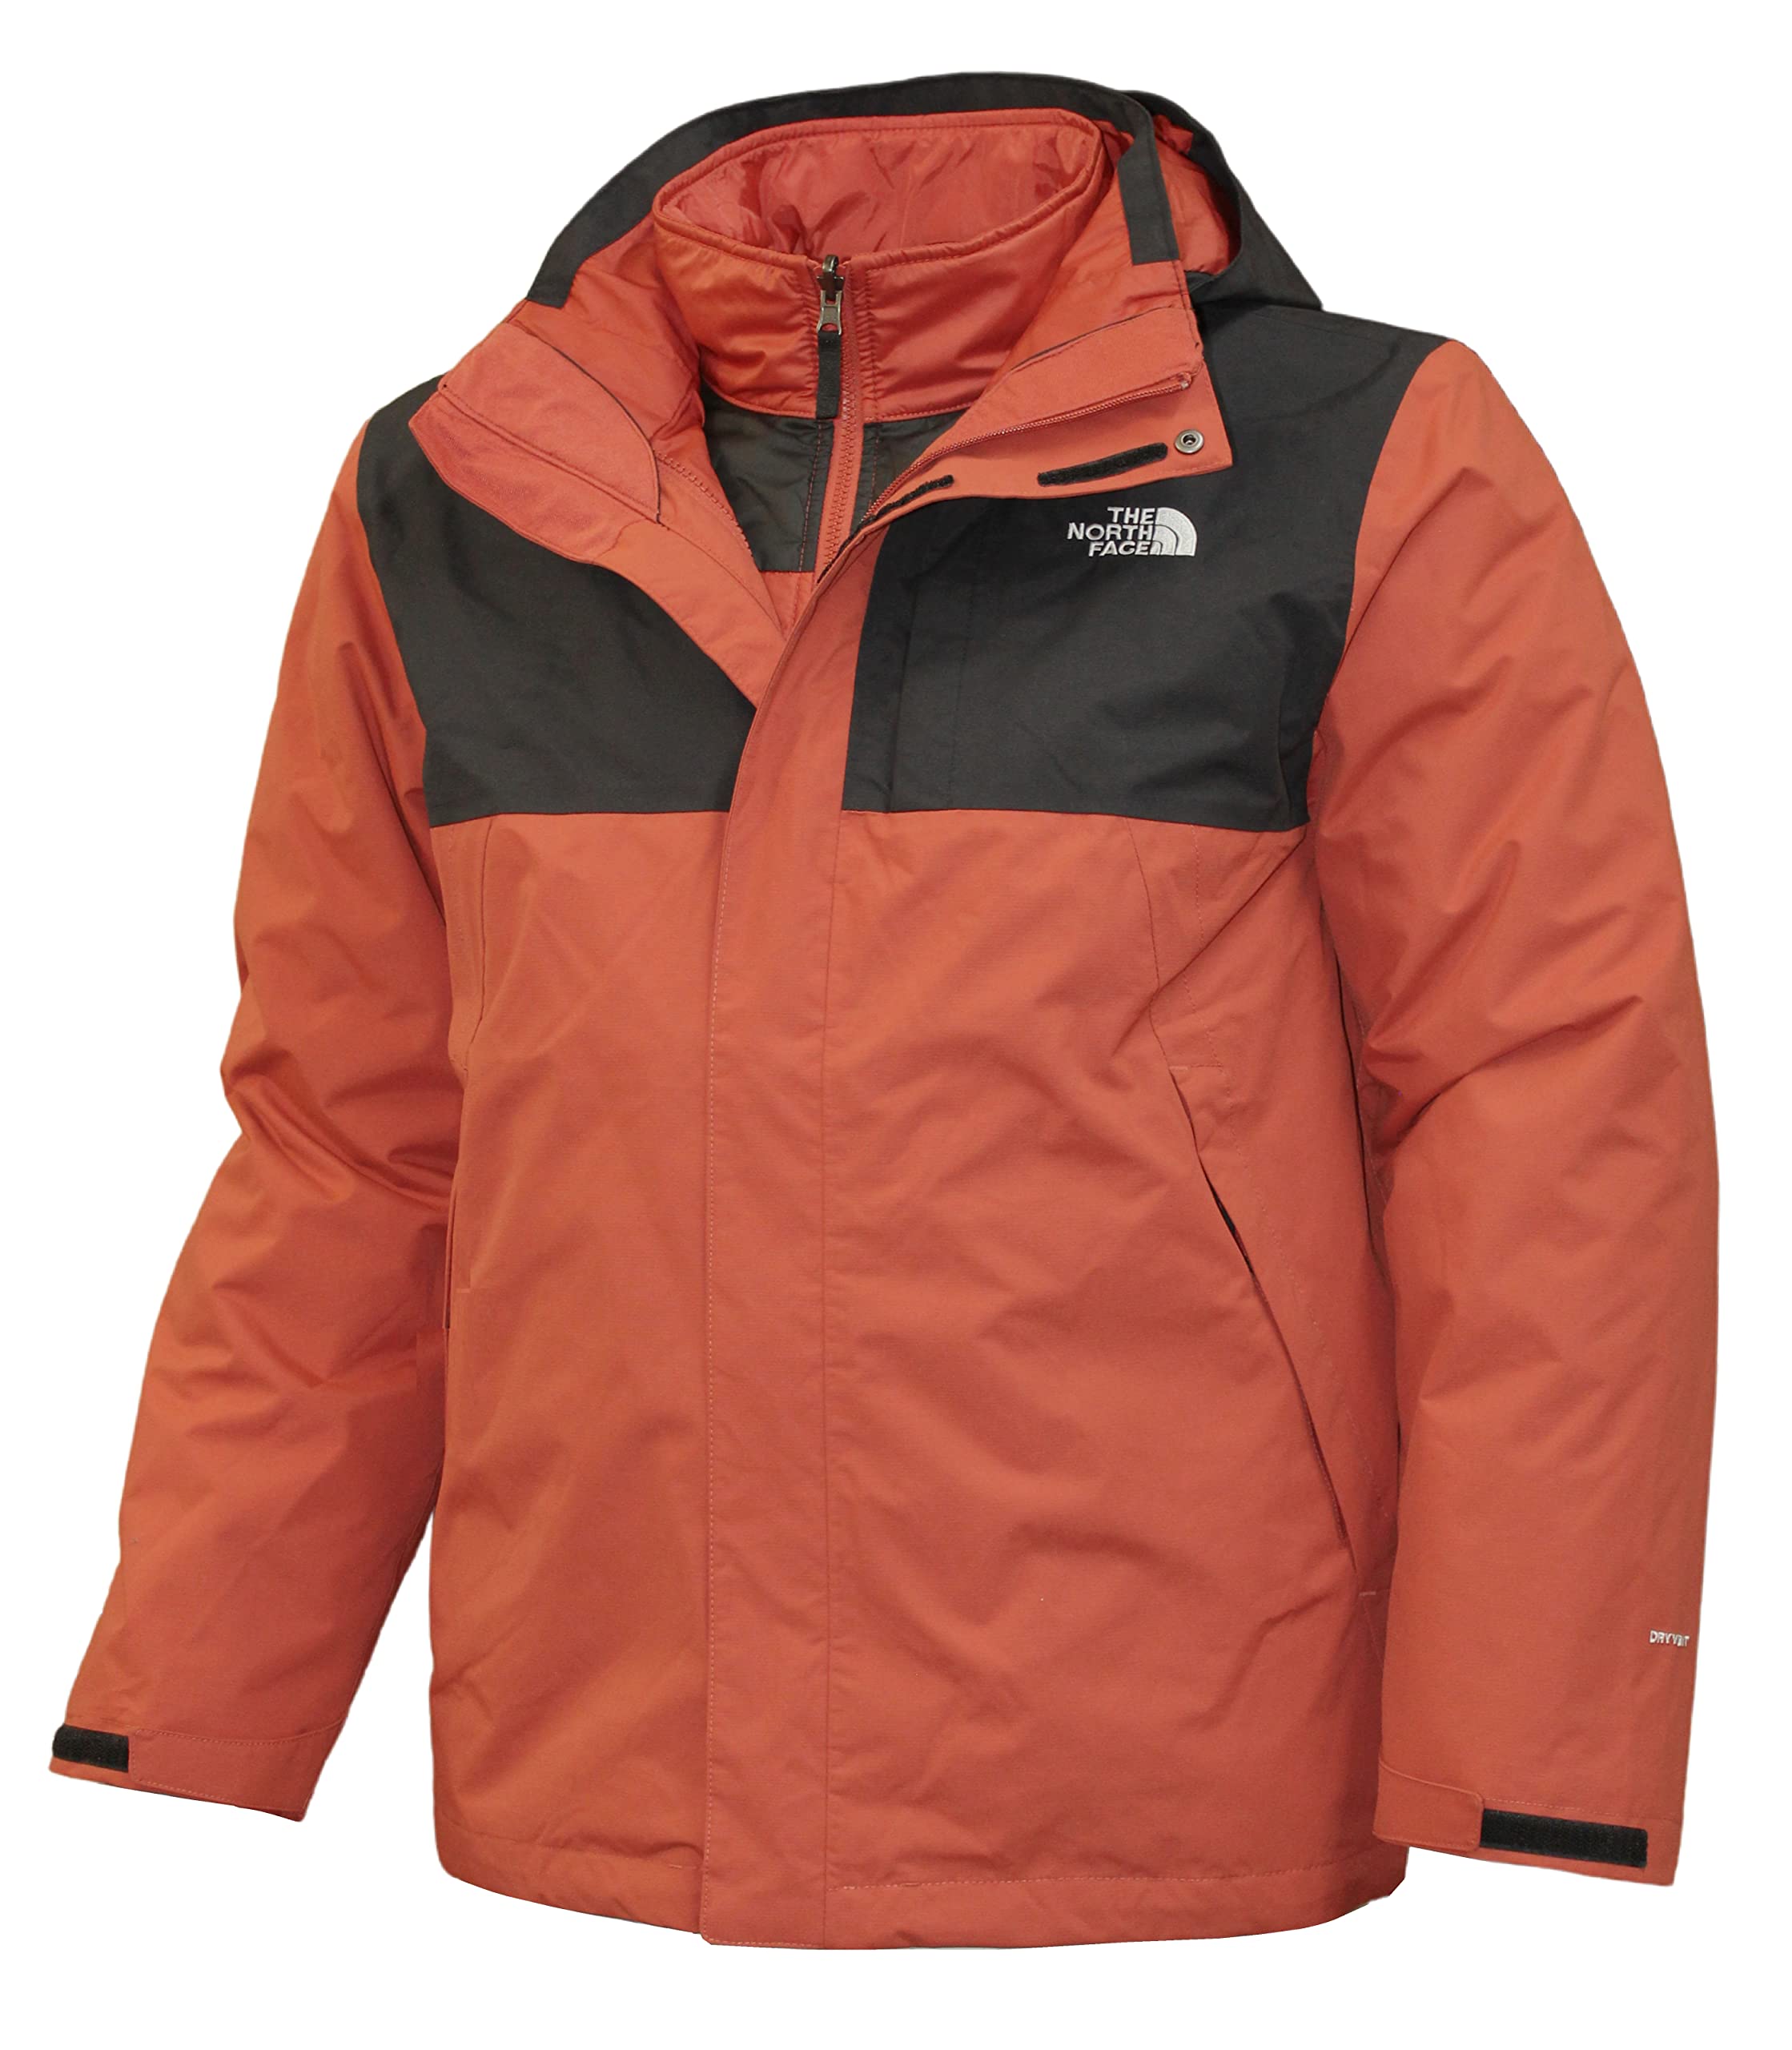 THE NORTH FACE Men's Lone Peak Monte Bre Triclimate 2 Jacket